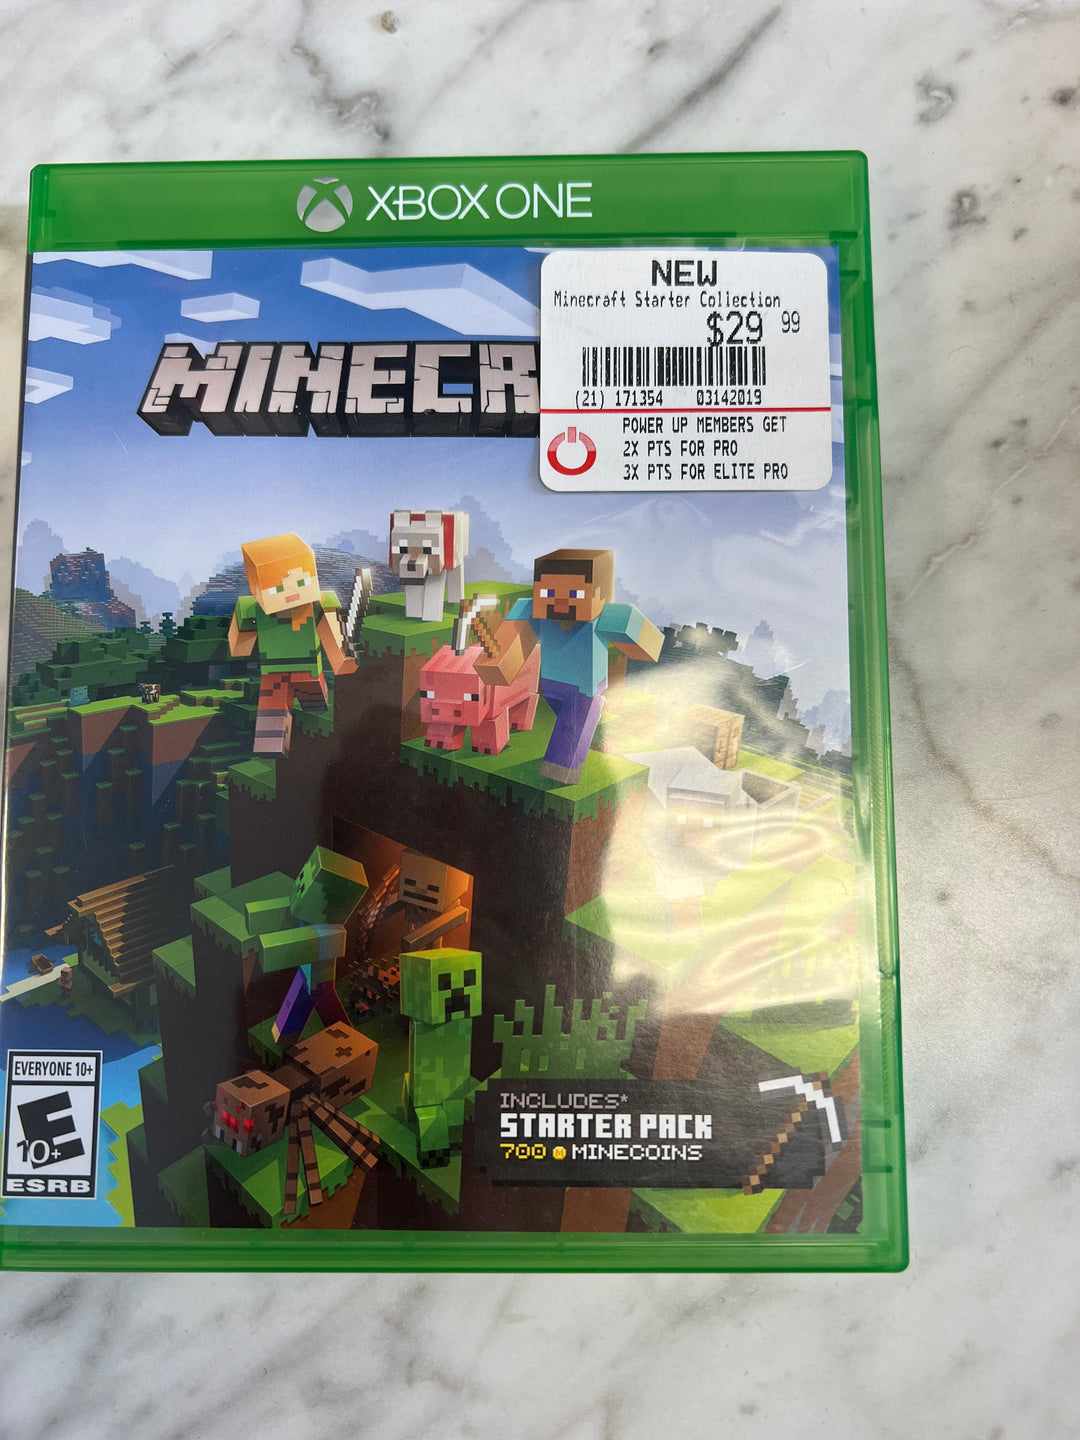 Minecraft for Xbox One Tested and working DU72124